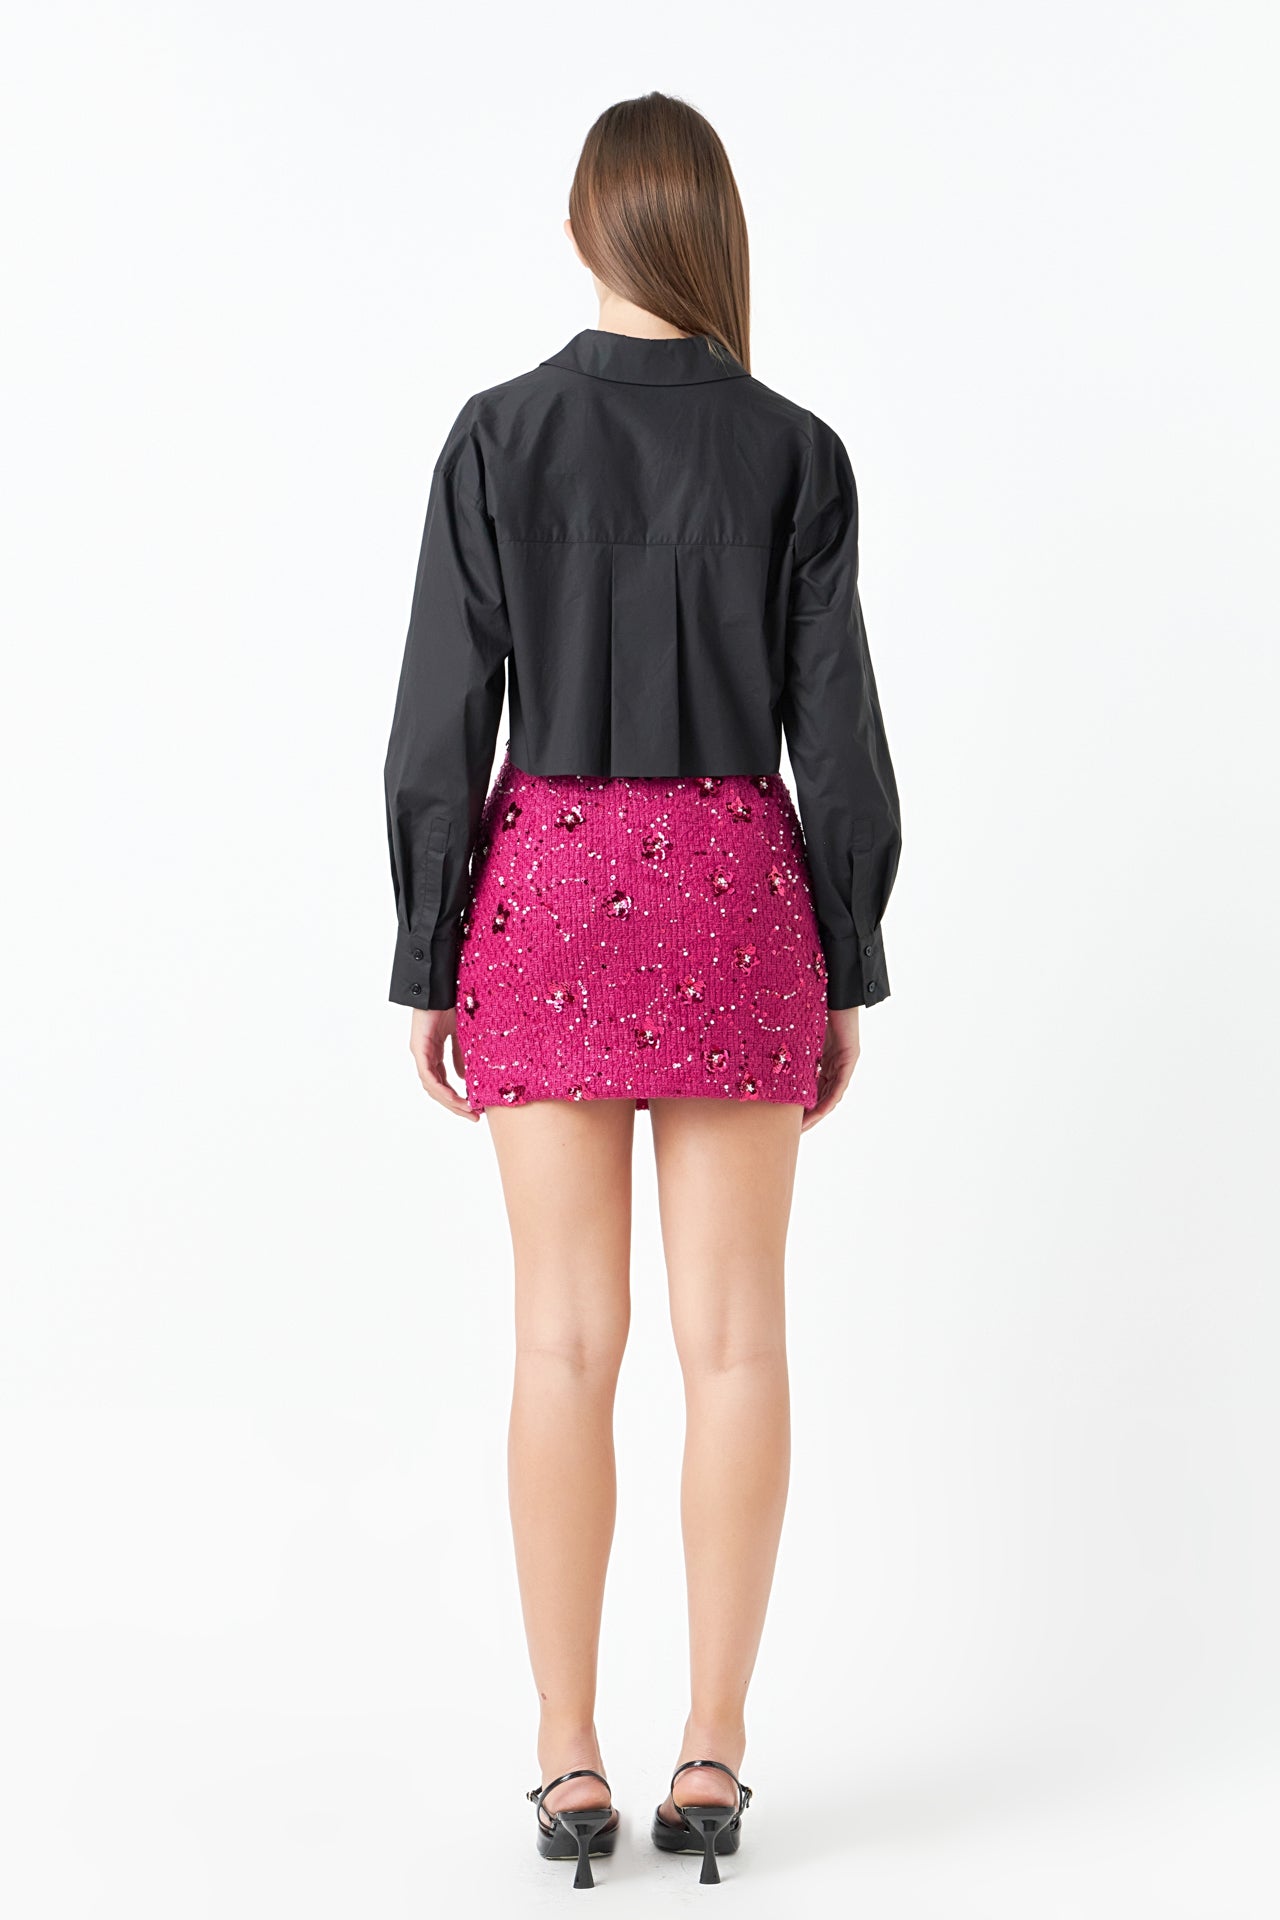 ENDLESS ROSE - Sequins Mini Skirt - SKIRTS available at Objectrare